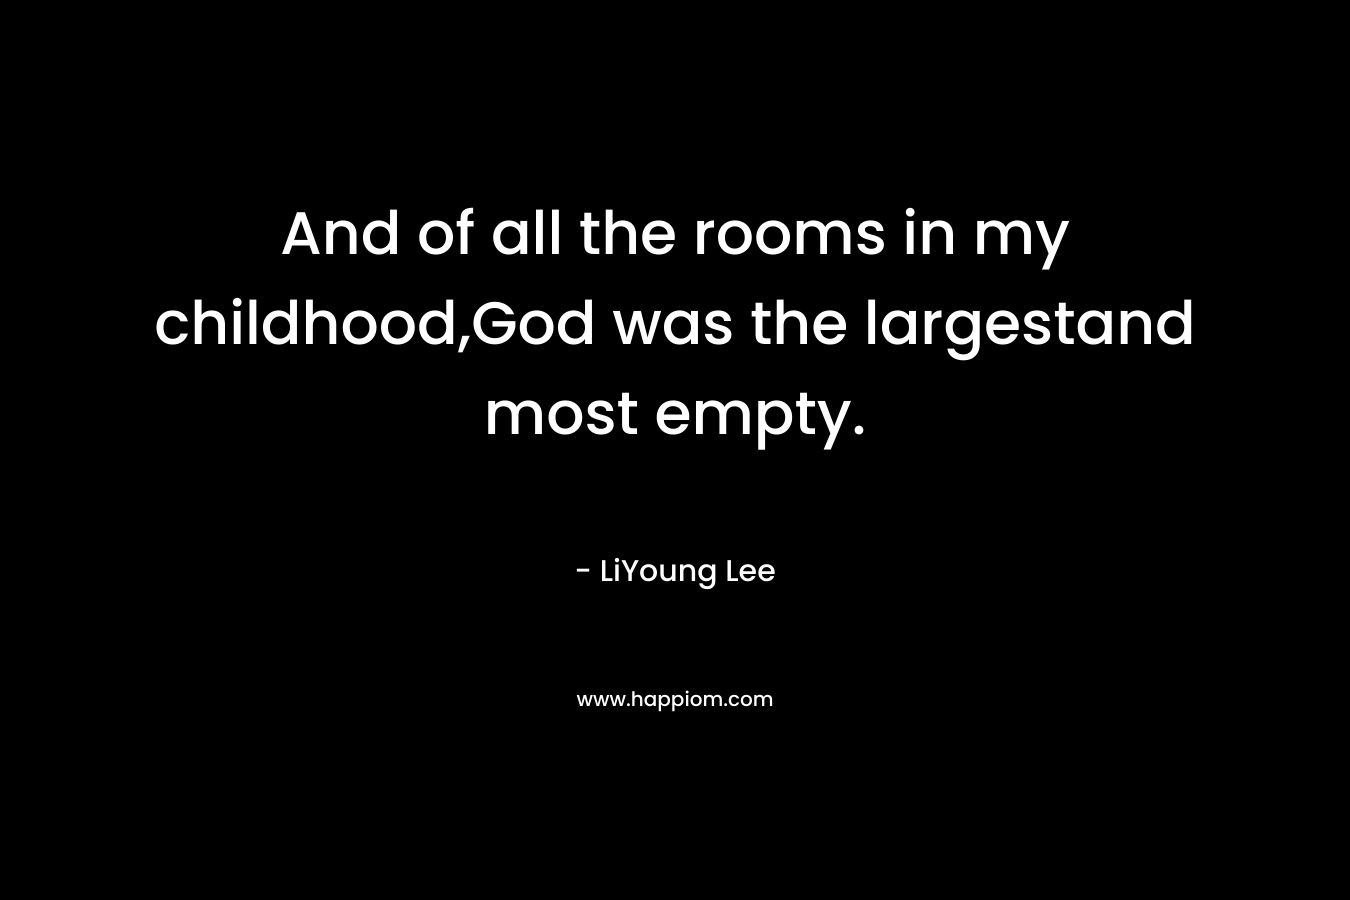 And of all the rooms in my childhood,God was the largestand most empty. – LiYoung Lee